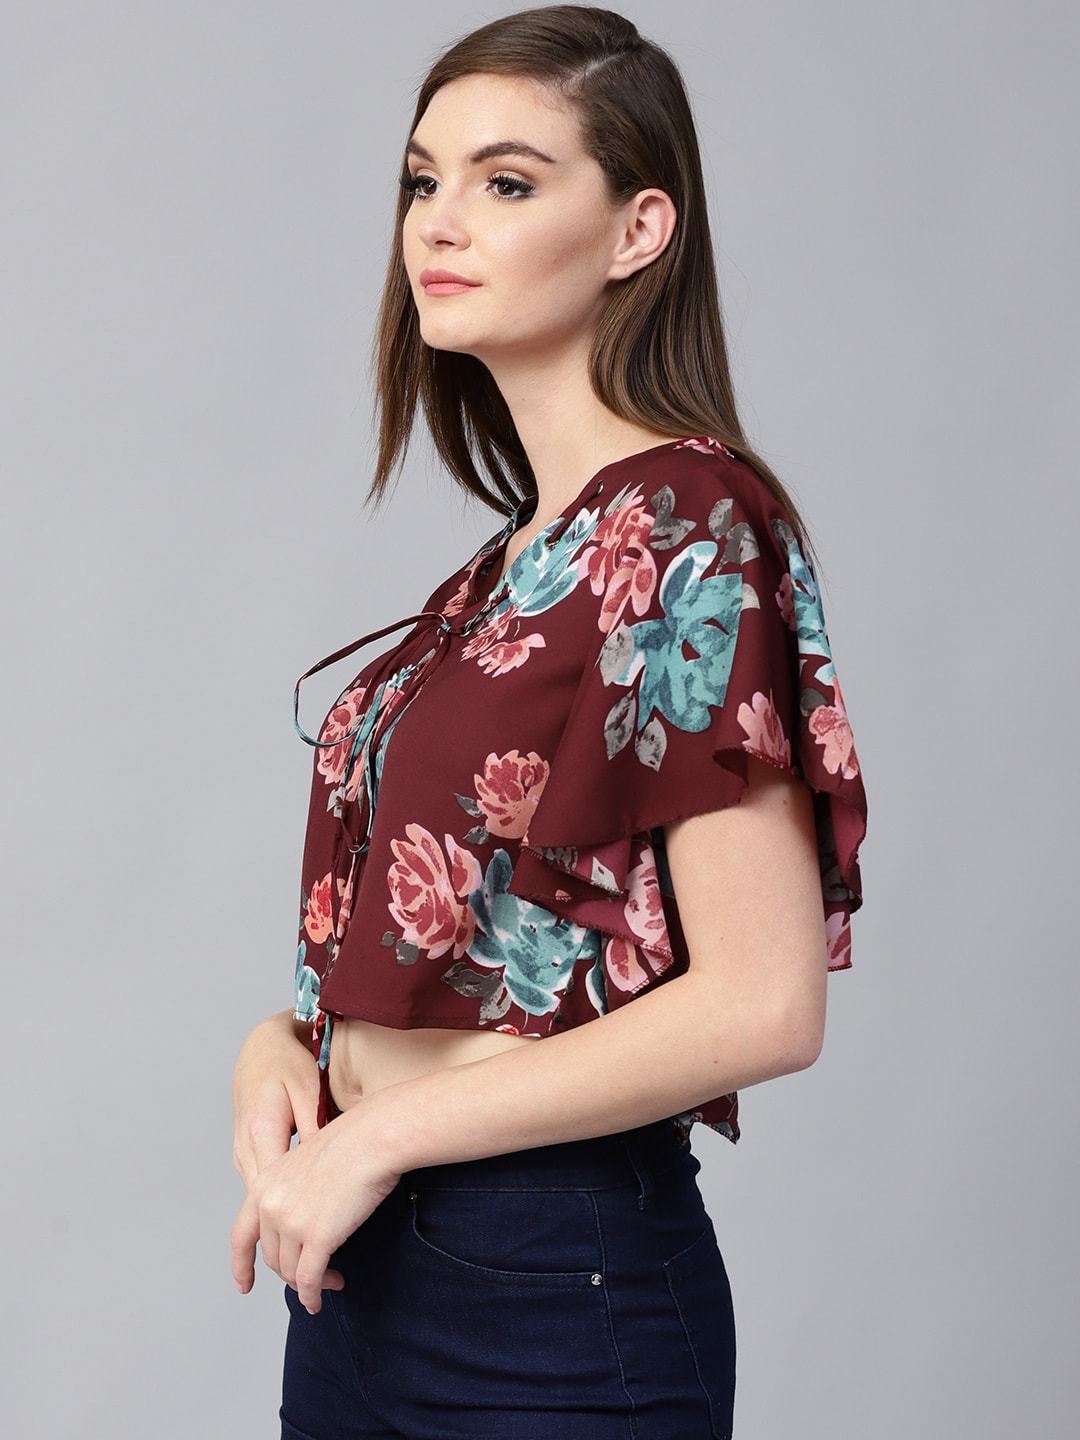 Women's Floral Flare Sleeves Top - Pannkh